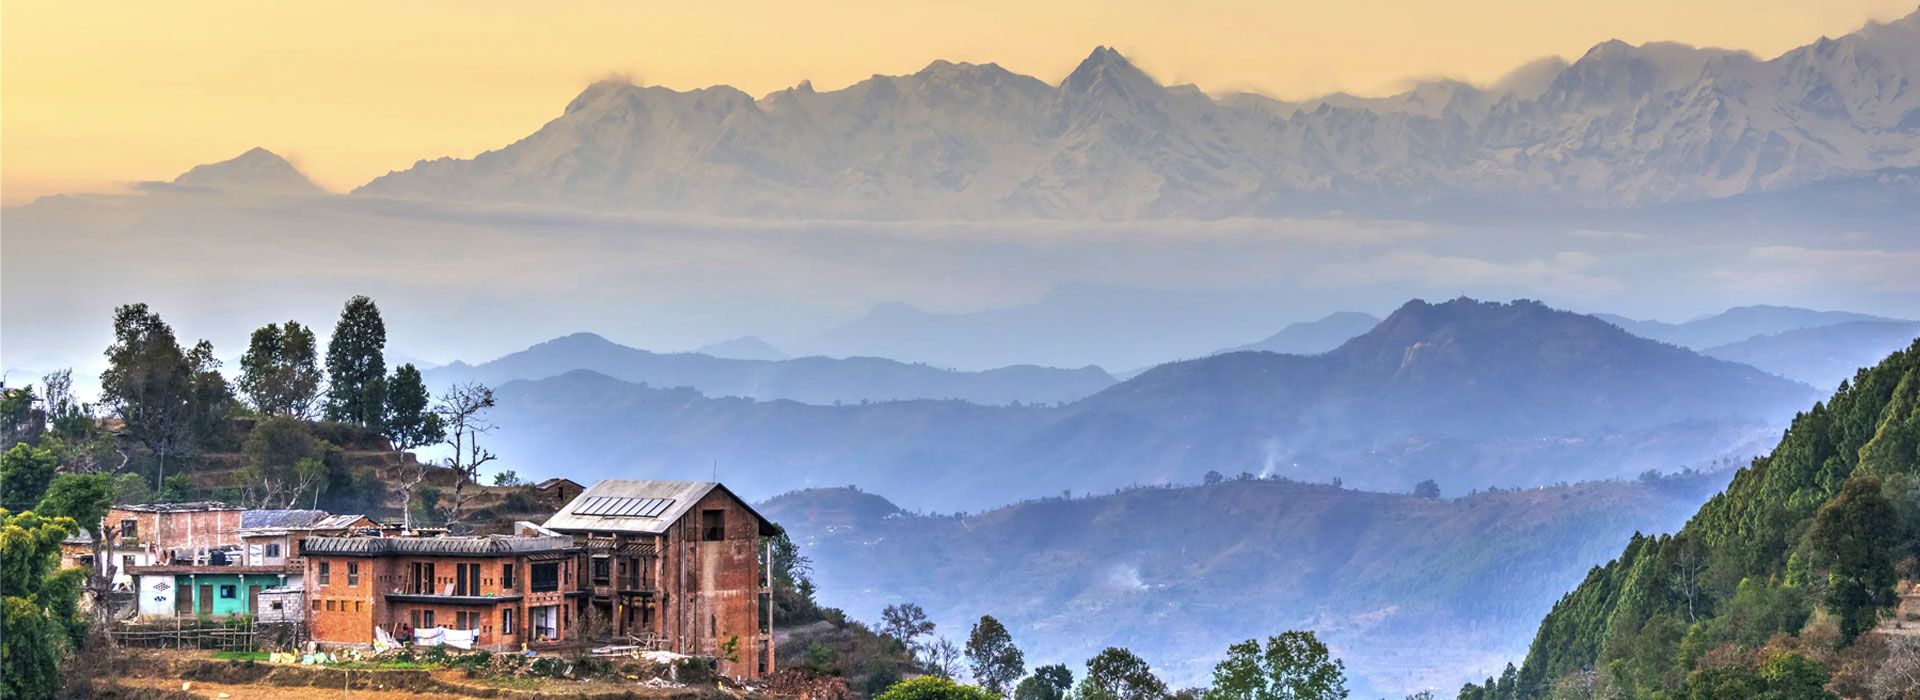 Bandipur, famous hill station in Nepal